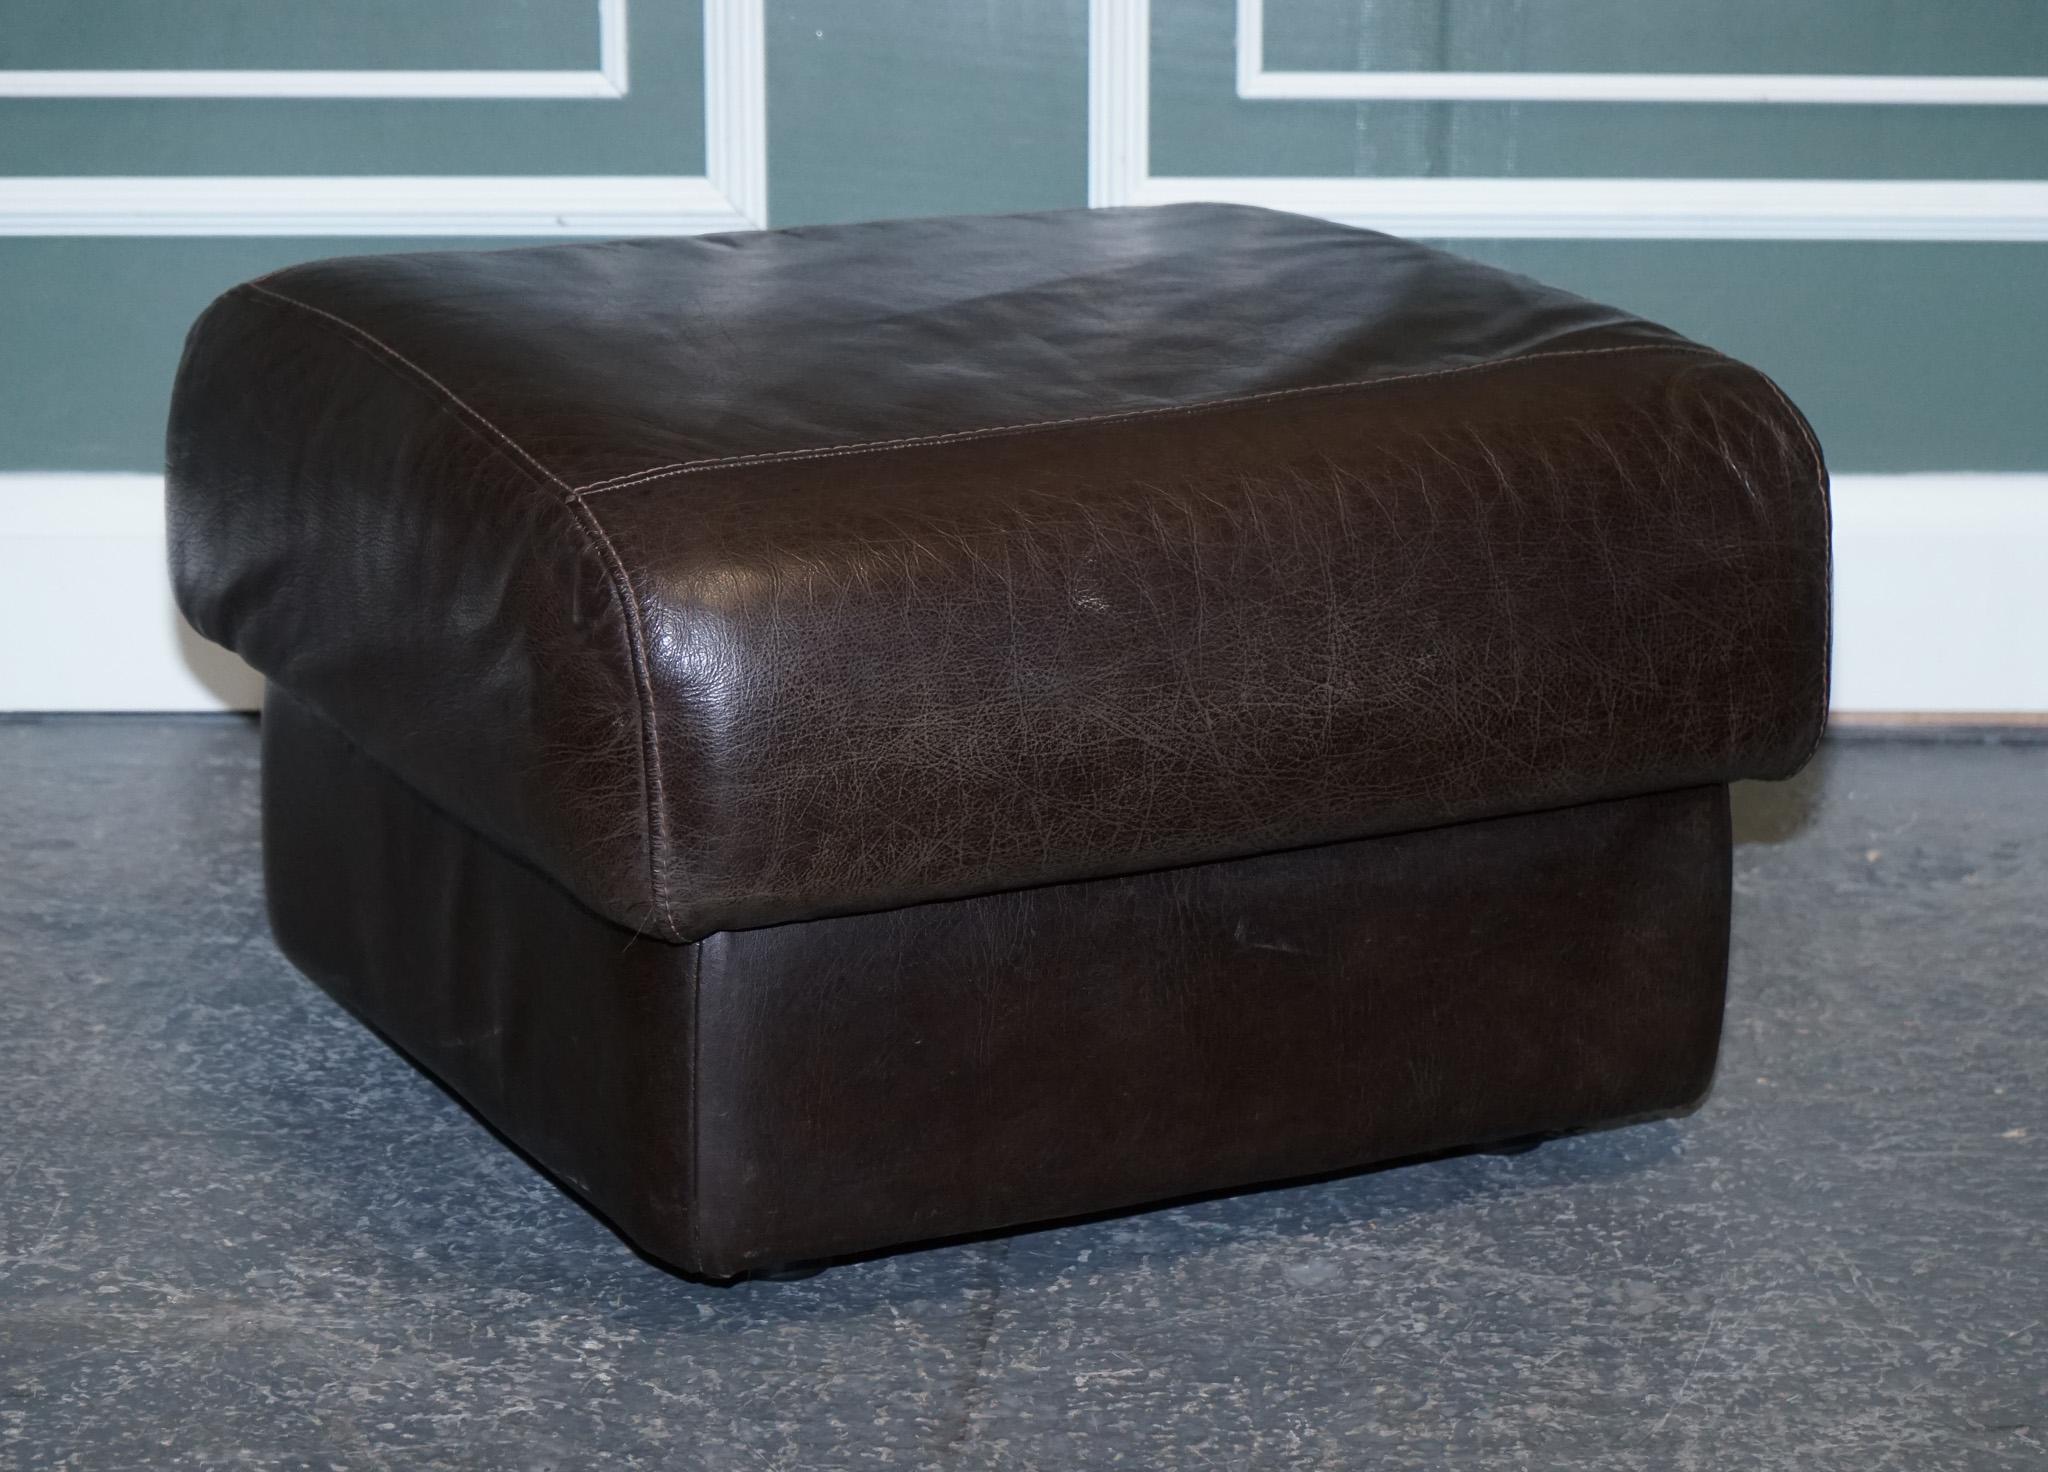 British Vintage Chocolate Brown Leather Footstool, '1/2' For Sale